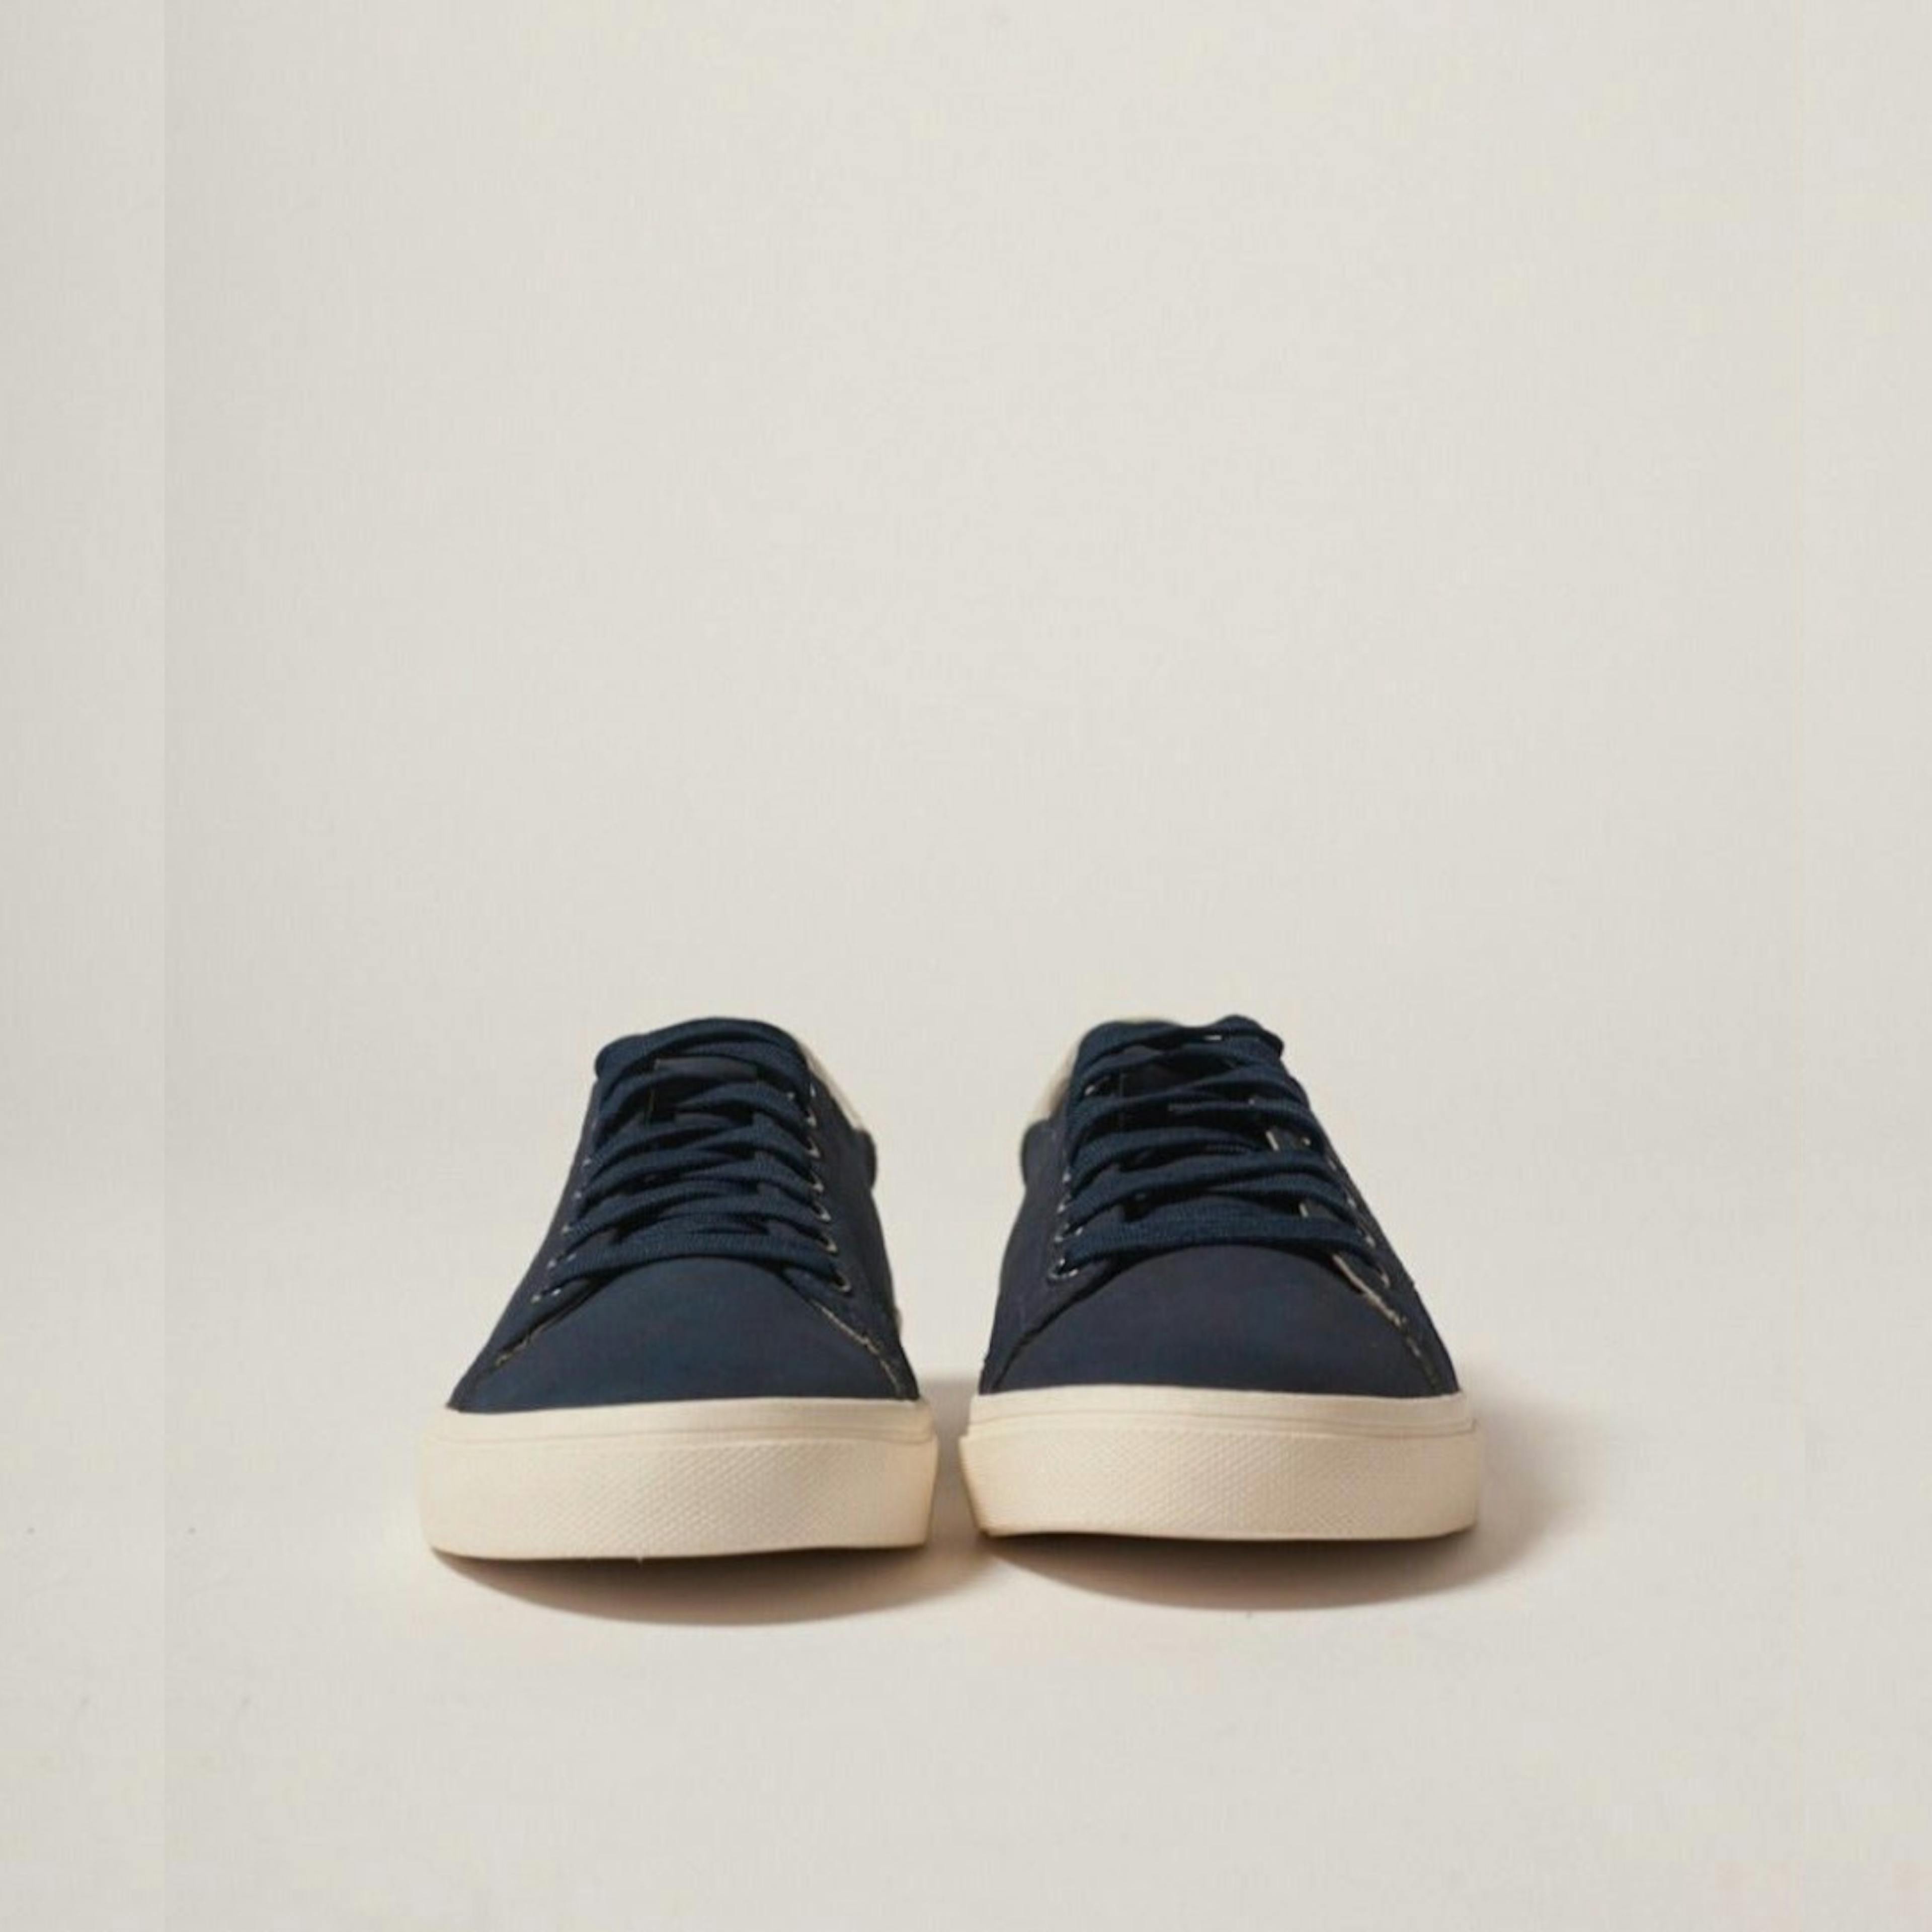 Vegan Suede Lace Up Trainers | Low Classic | Dark Navy